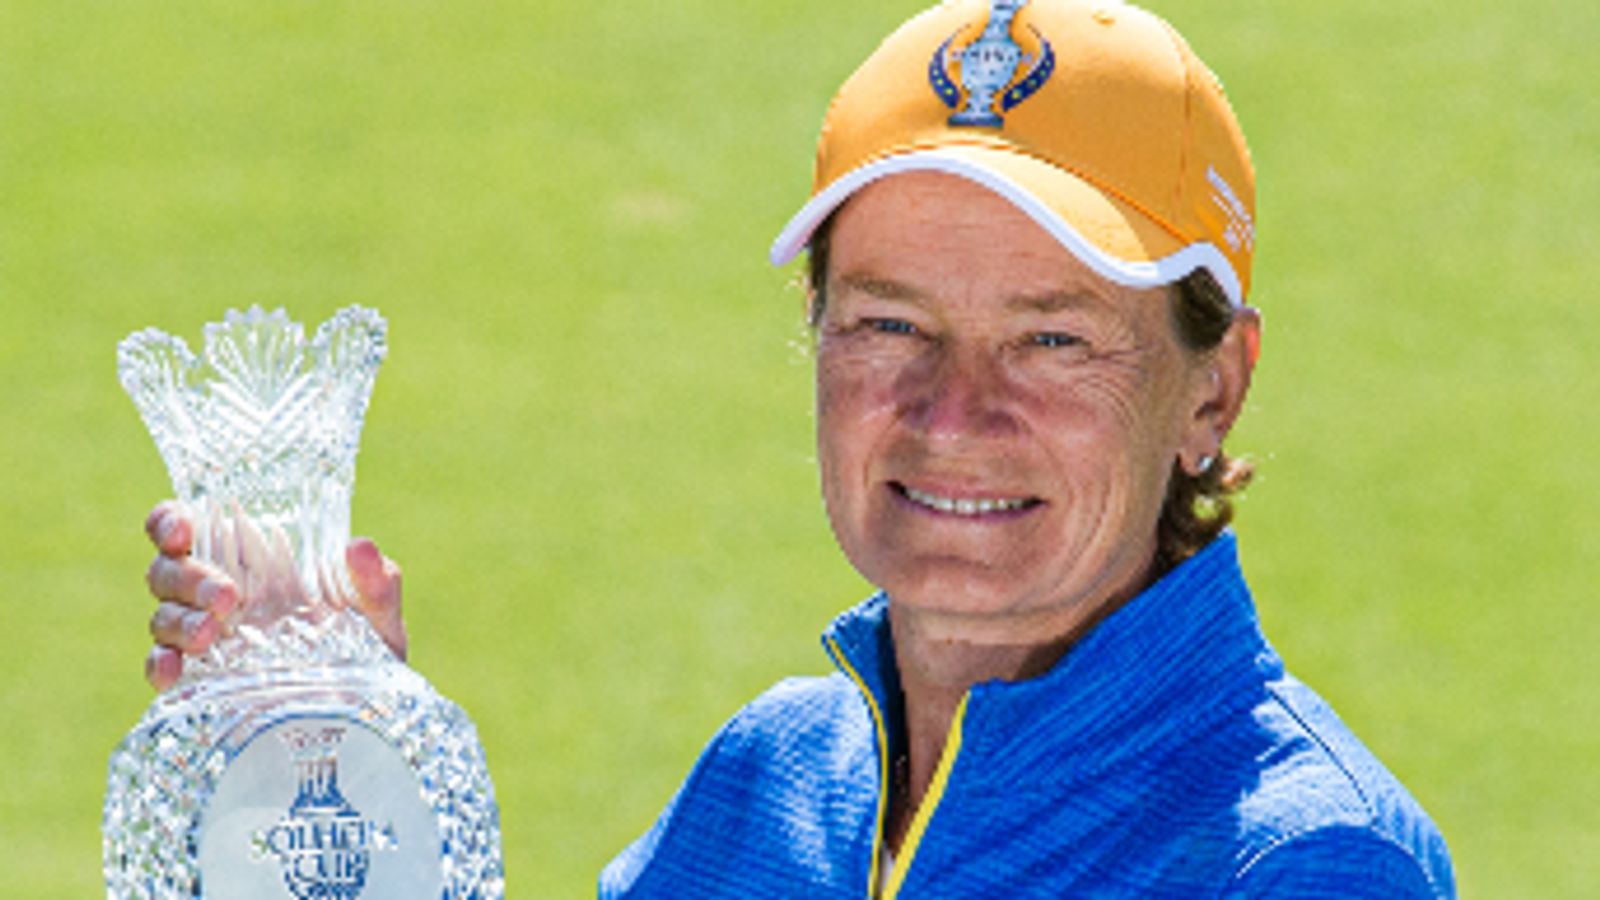 Solheim Cup Catriona Matthew pleased with Team Europe's form after